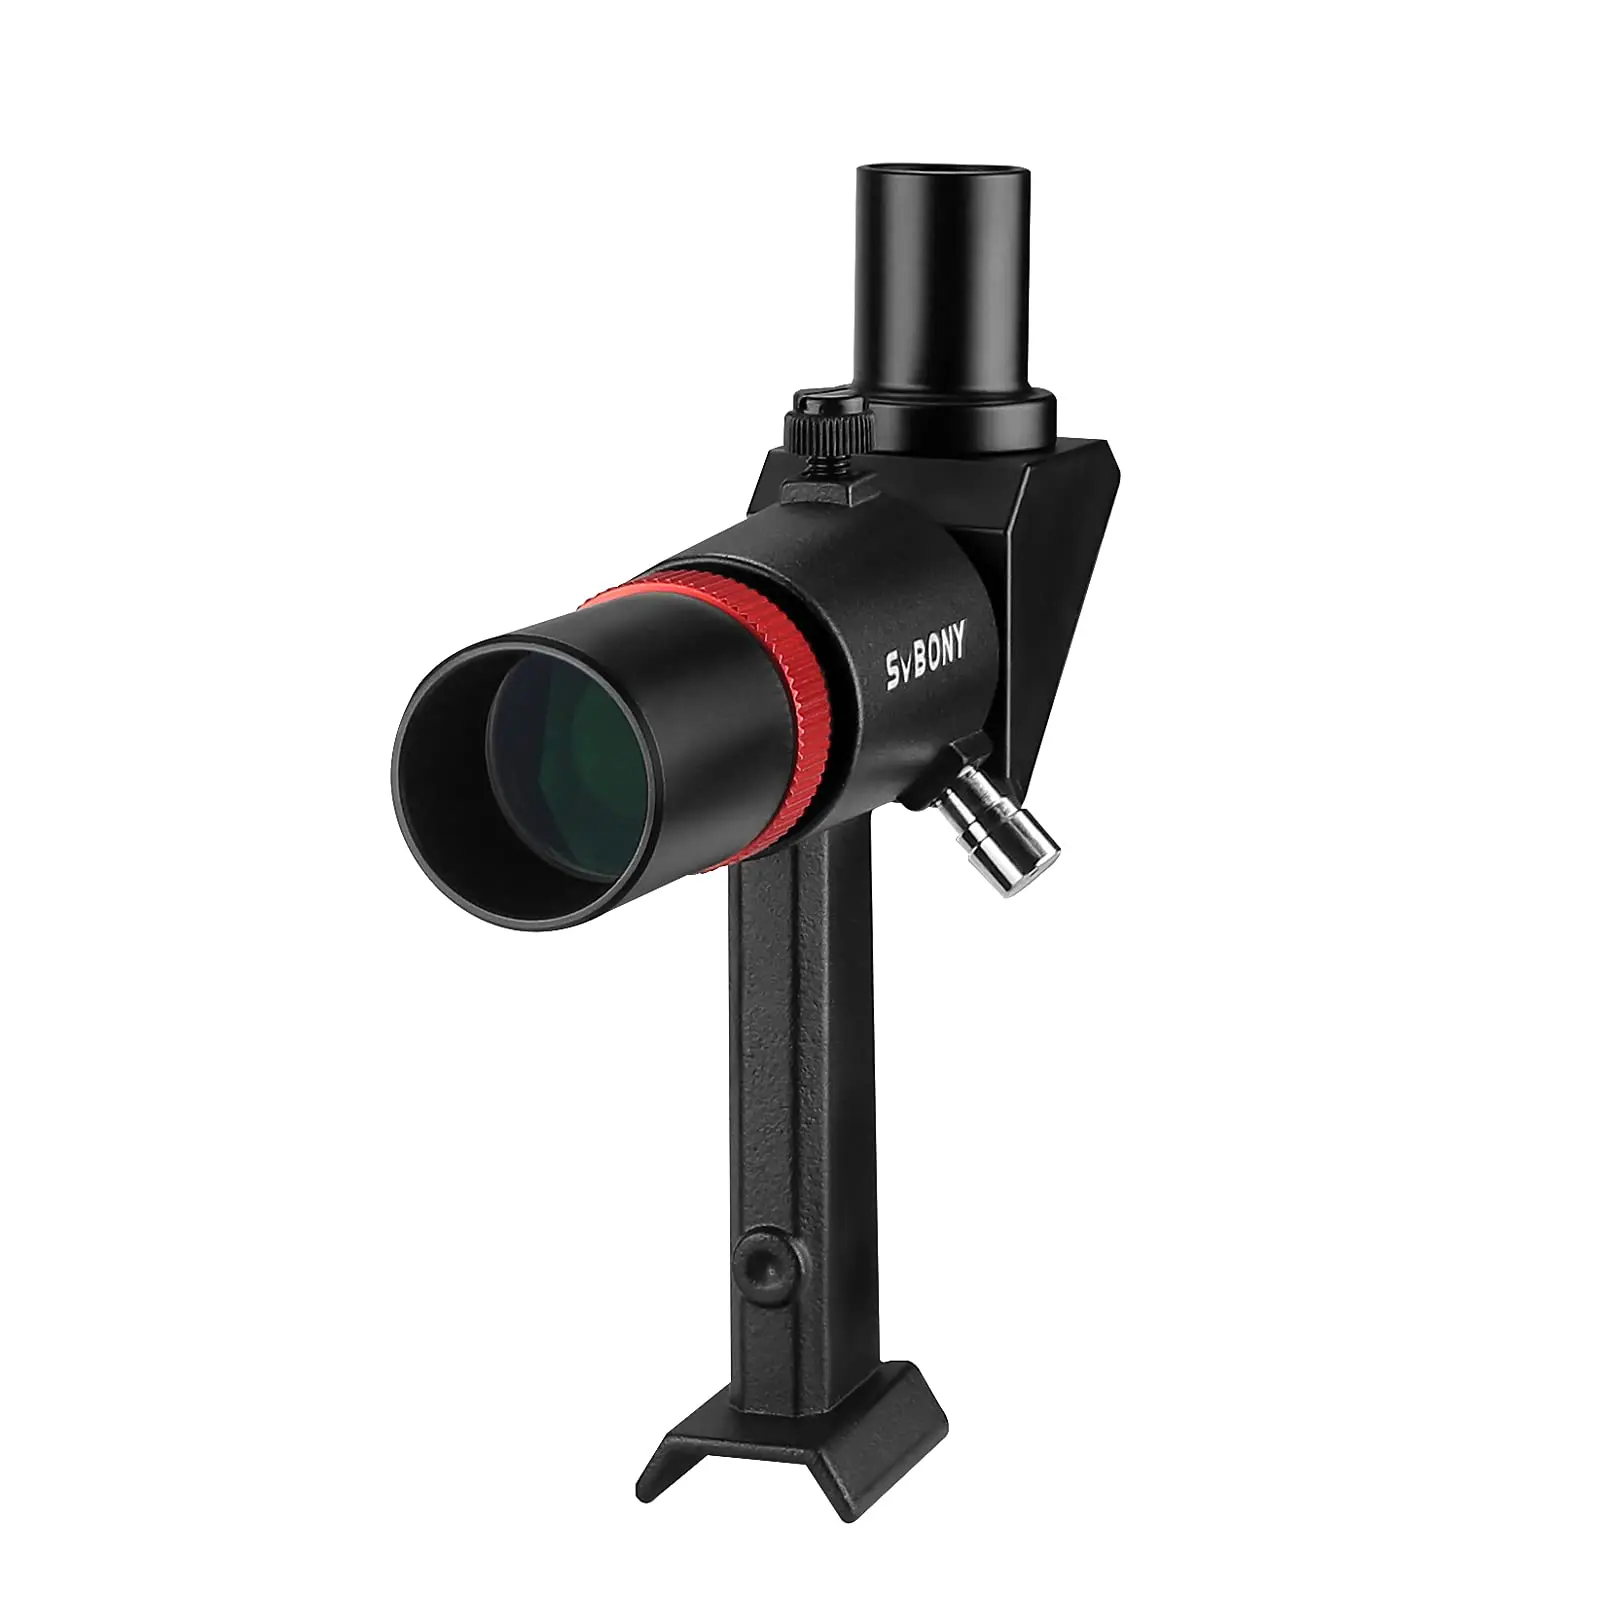 Svbony SV182 Telescope Finder 6x30 Right Angle Correct Image Optical Spot Finder FMC Achromatic for Astronomy Viewfinder